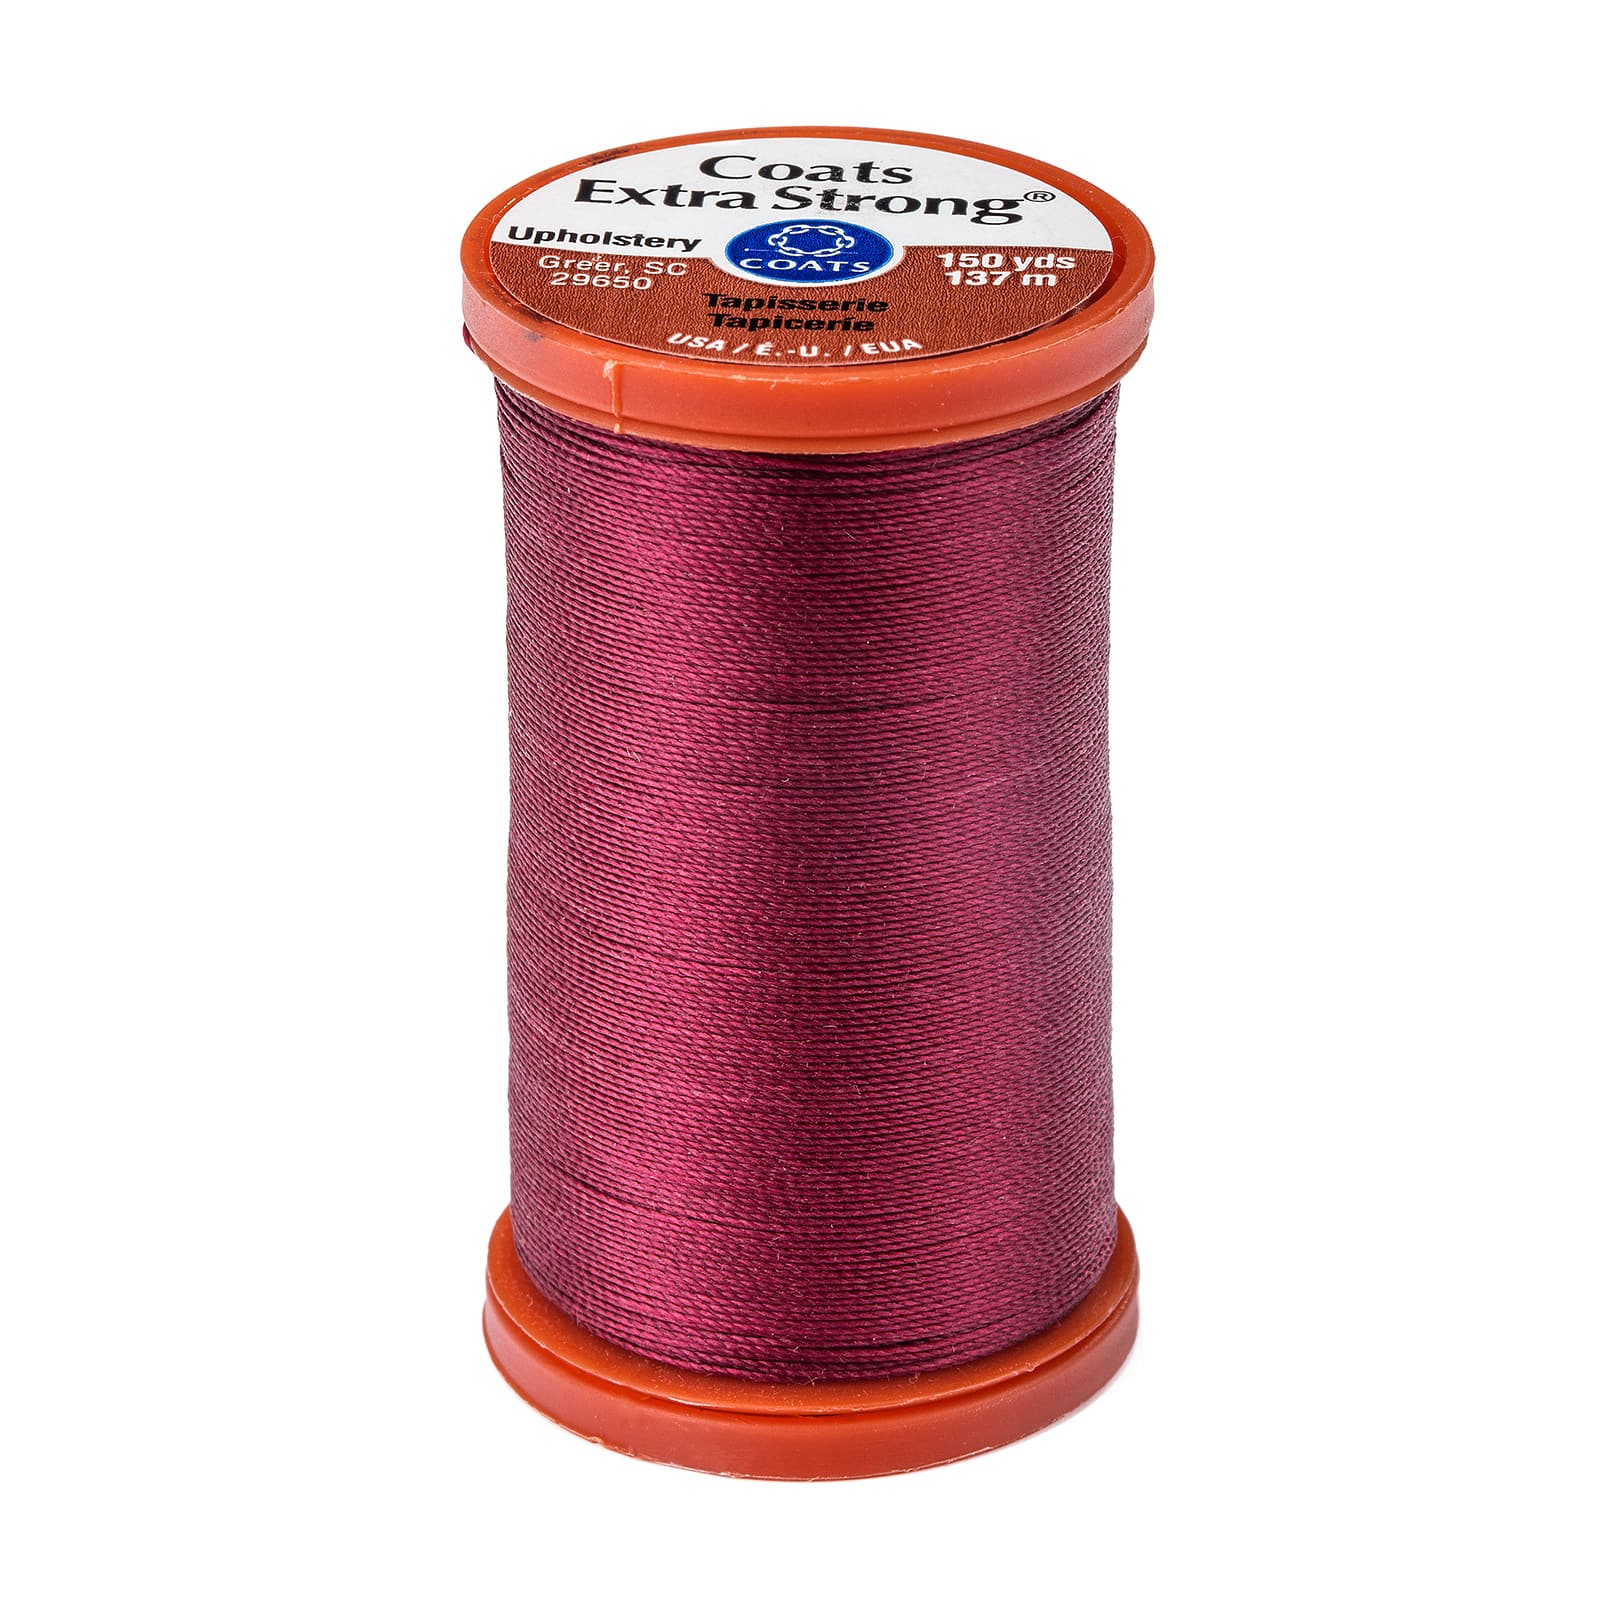 Coats Extra Strong Upholstery Thread - S964-8240 - Tan – Willow